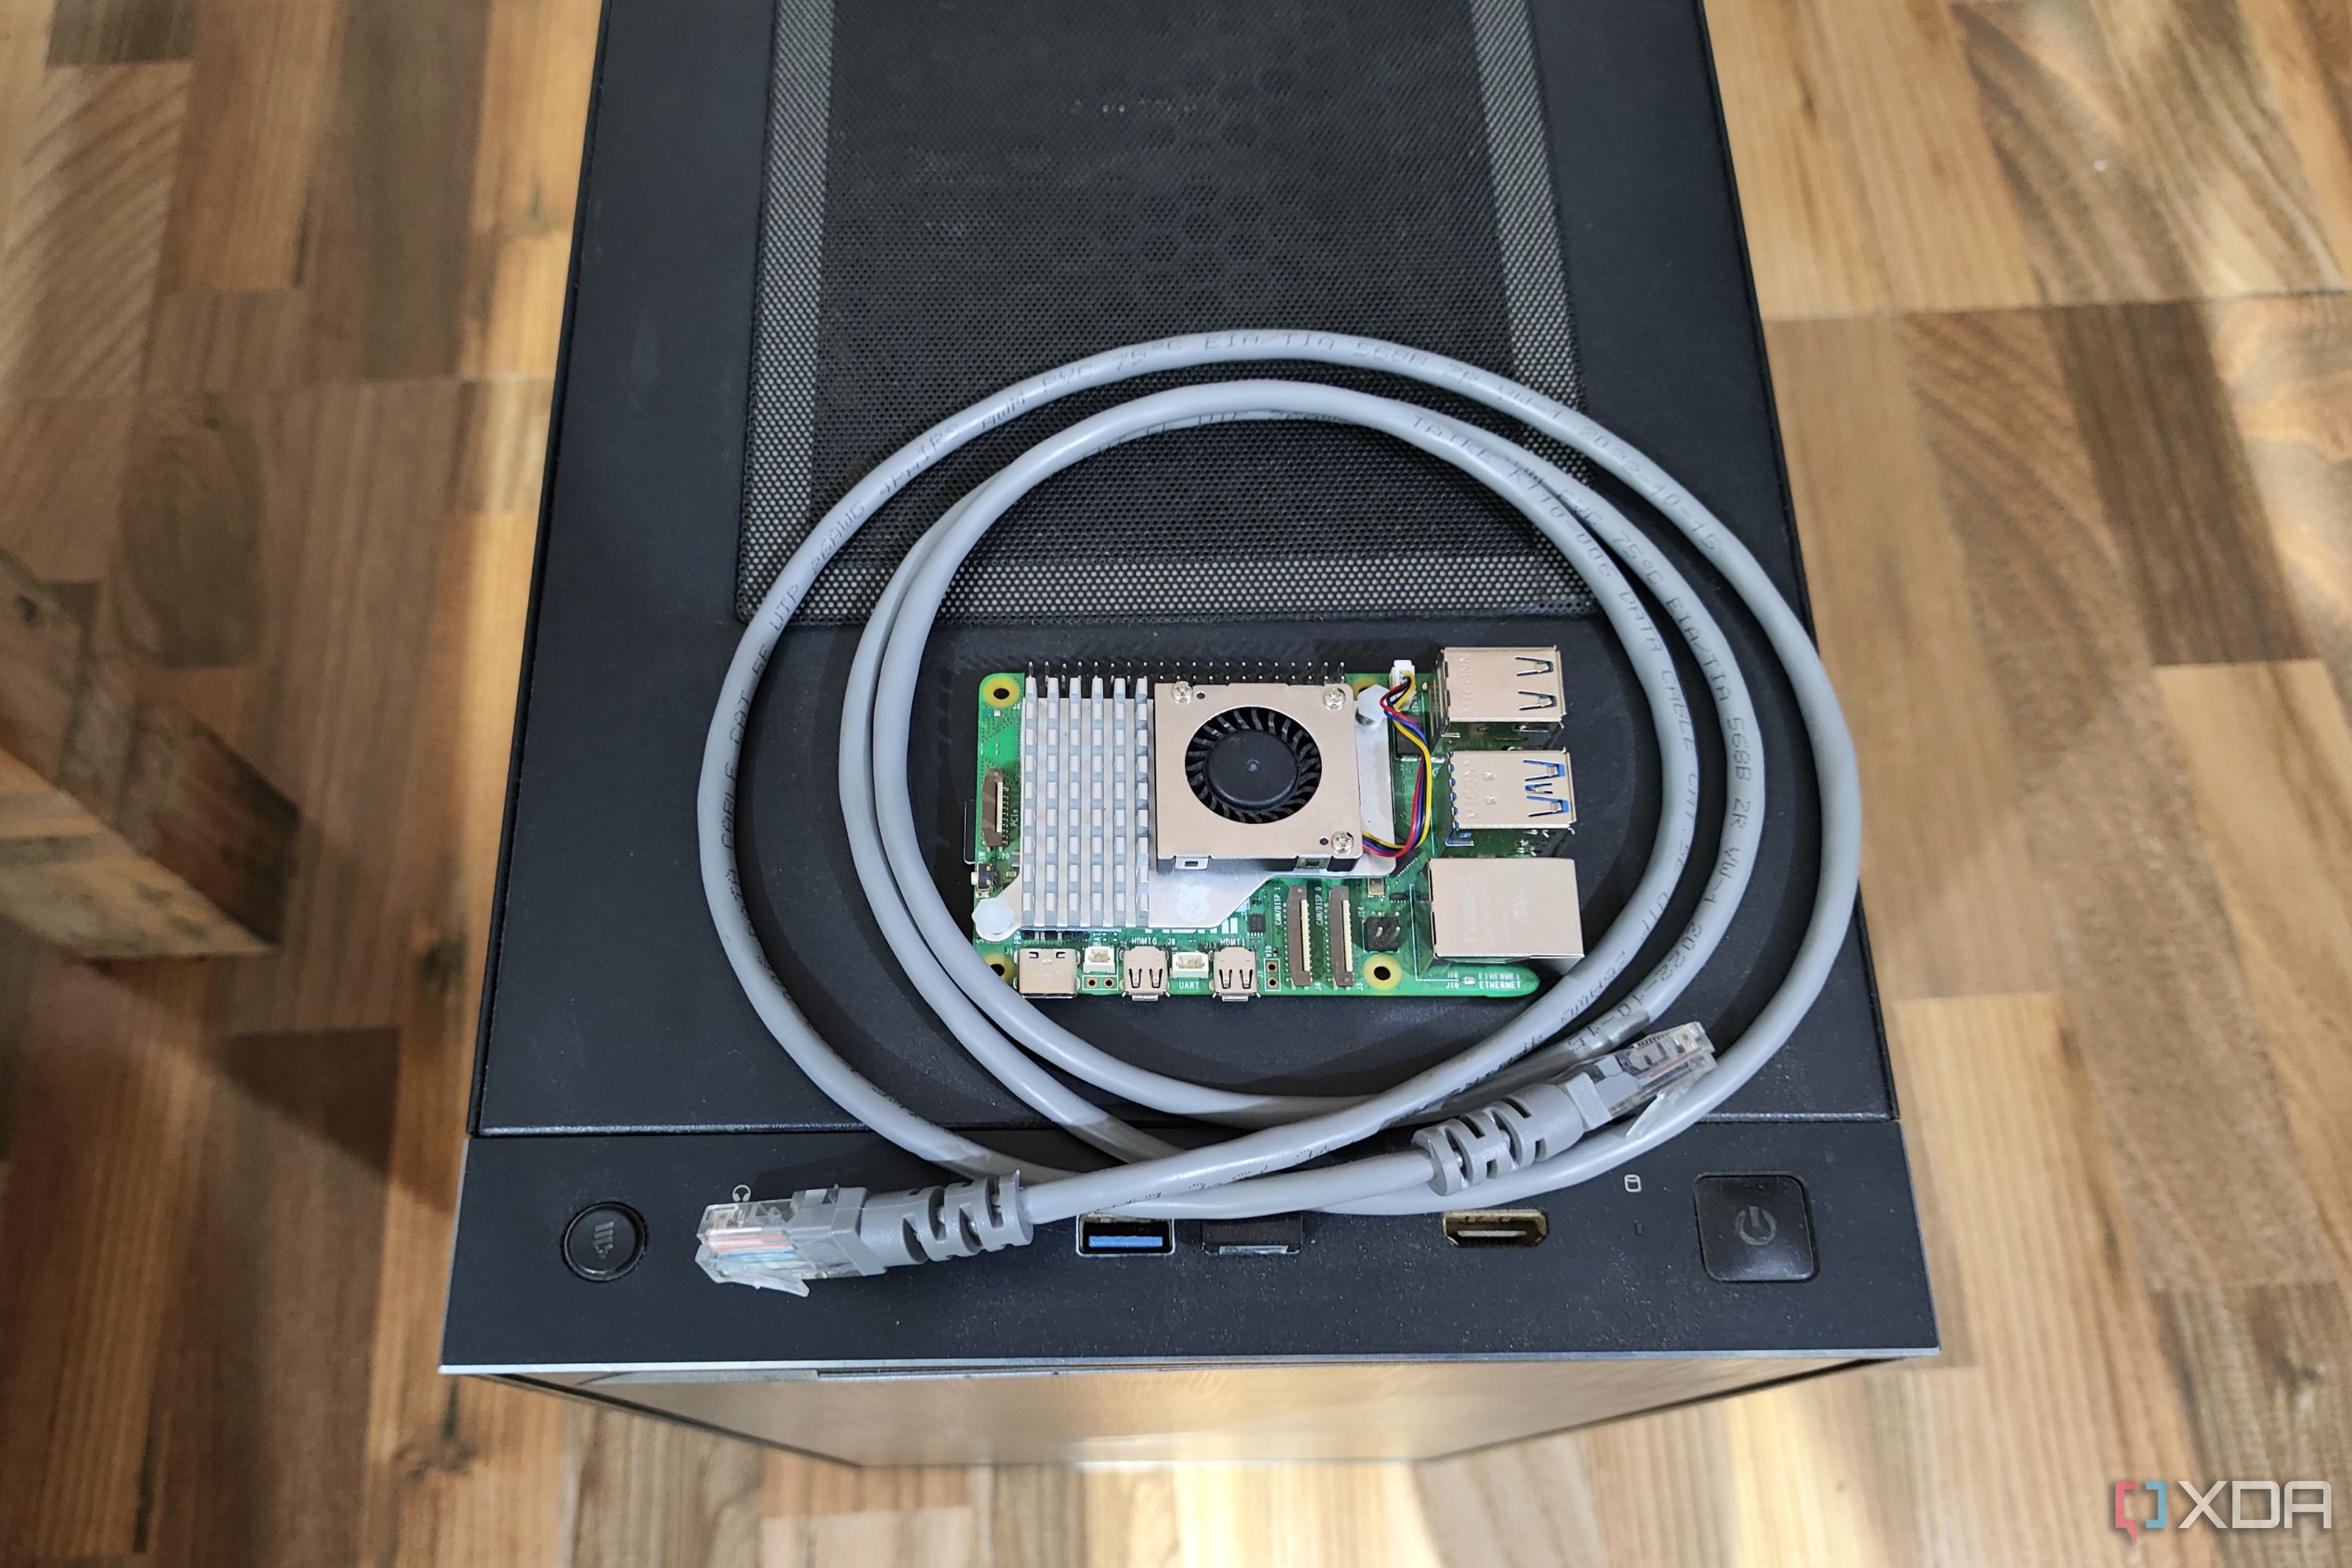 QnA VBage How to protect your home network with a Raspberry Pi firewall